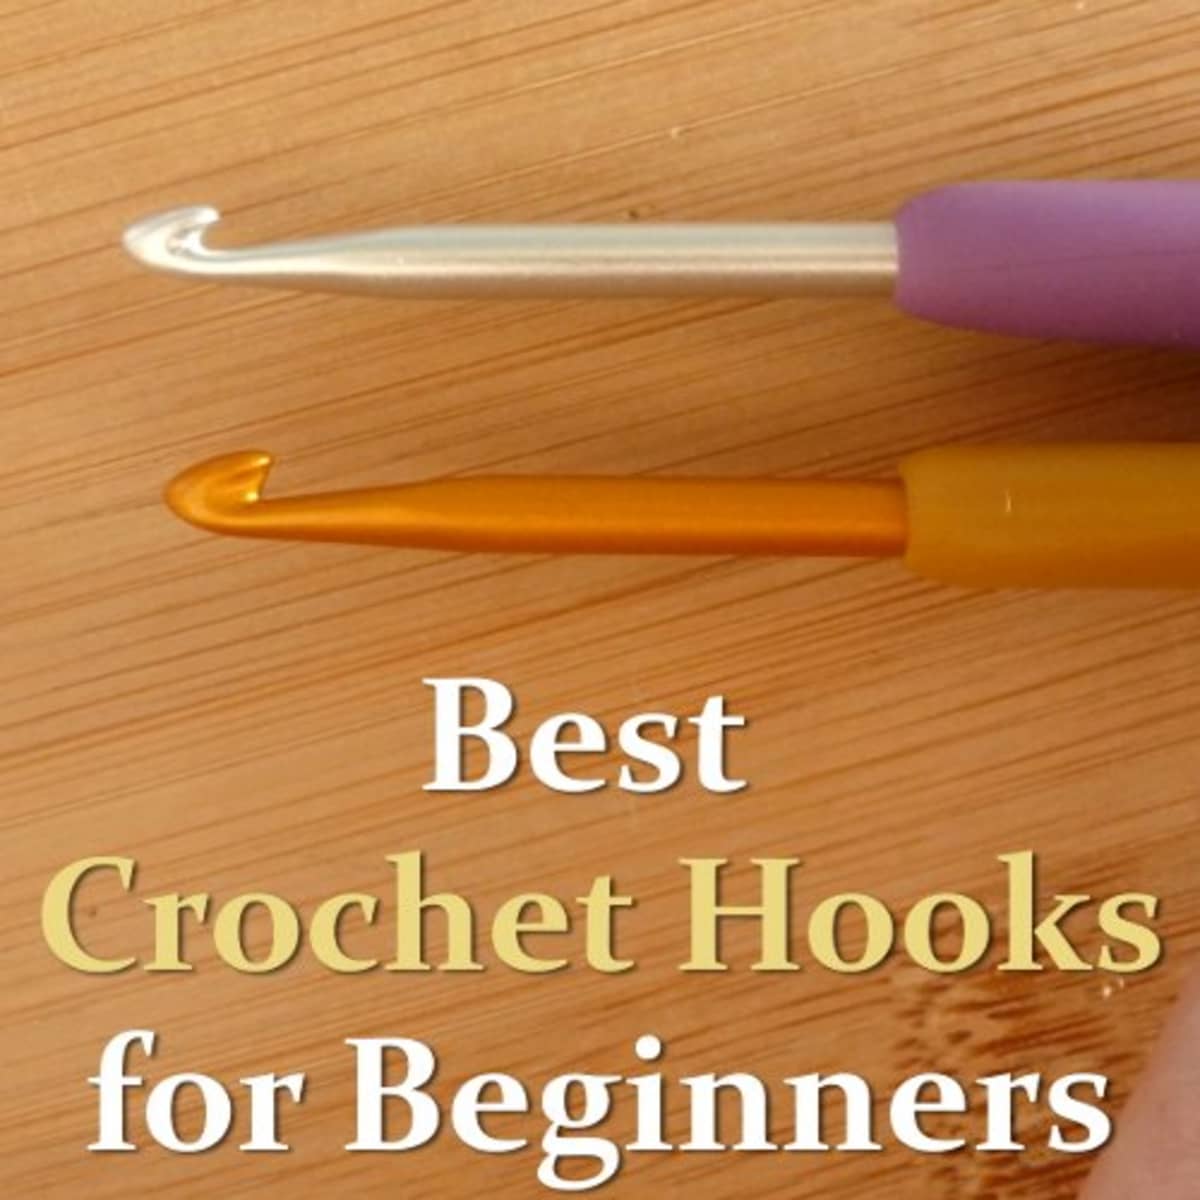 Crochet Hooks, Guide to Types and Sizes